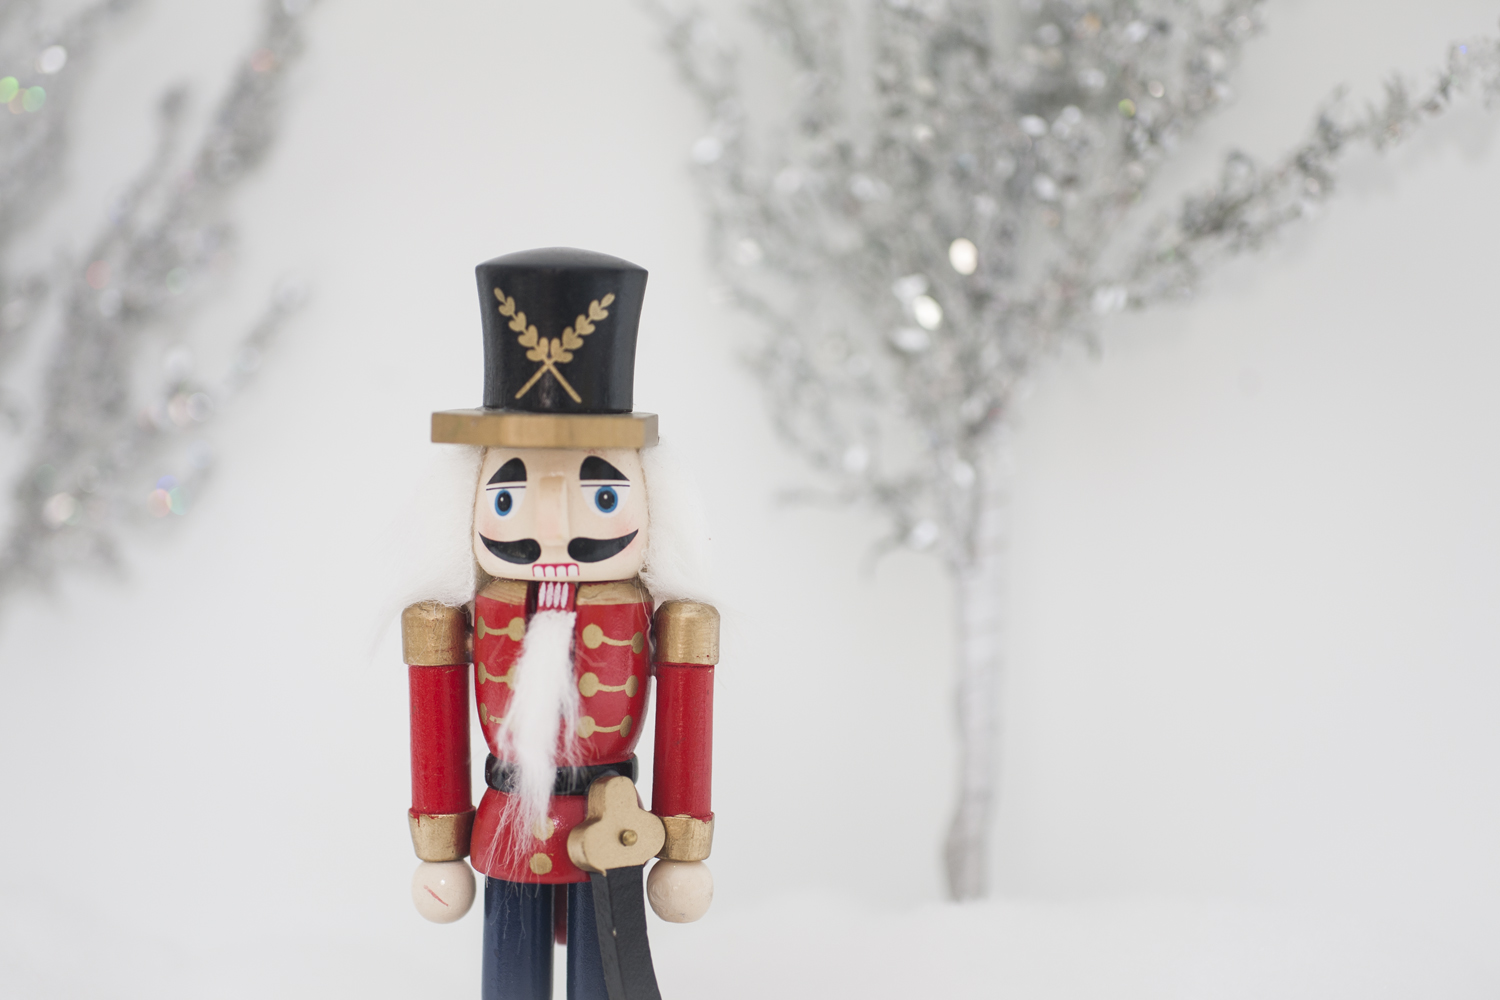 Nutcracker soldier and solver trees